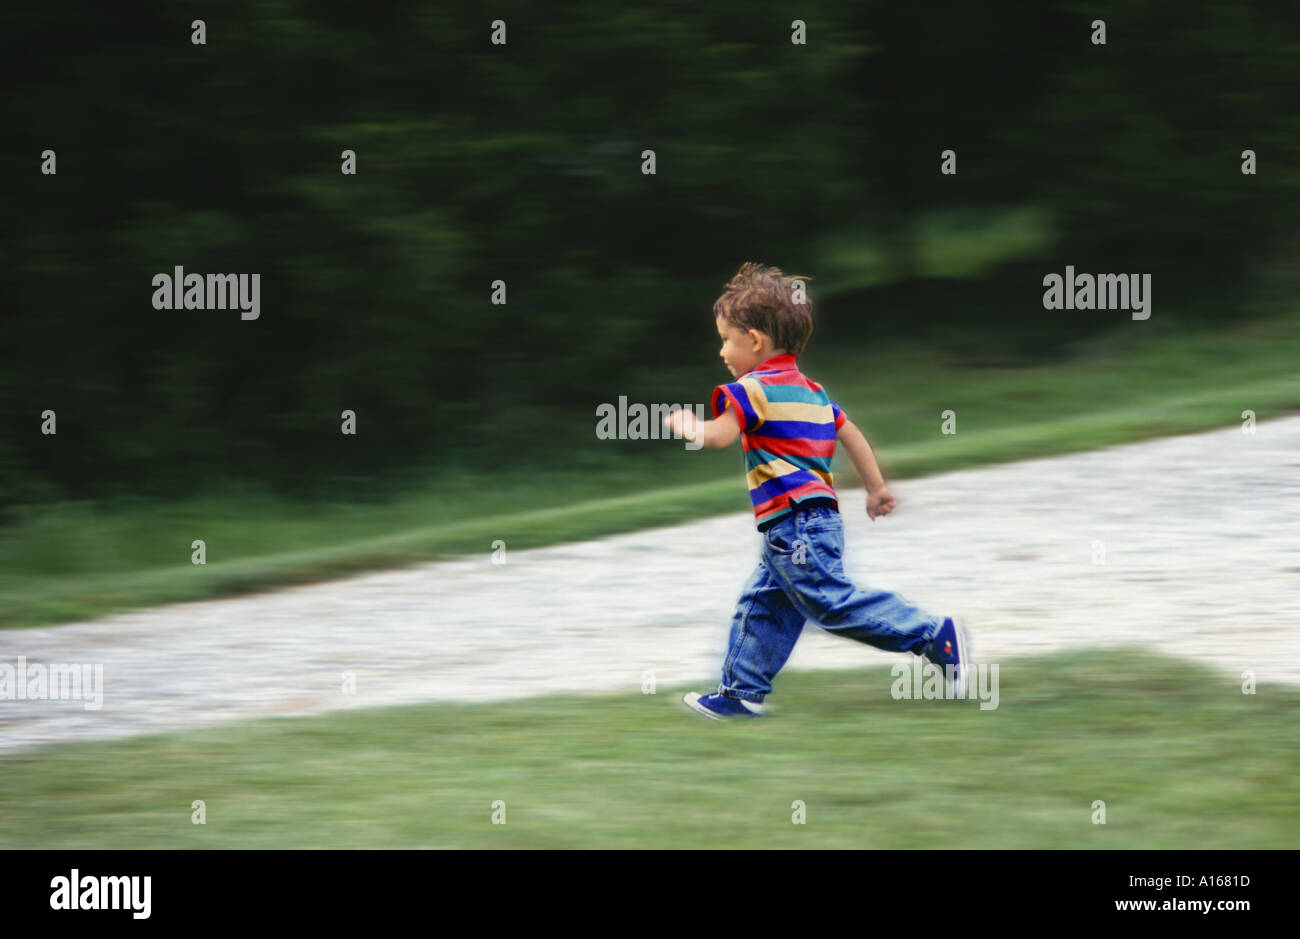 Fast as the wind: young boy ~ 4 years old running fast in his yard, Midwest USA Stock Photo